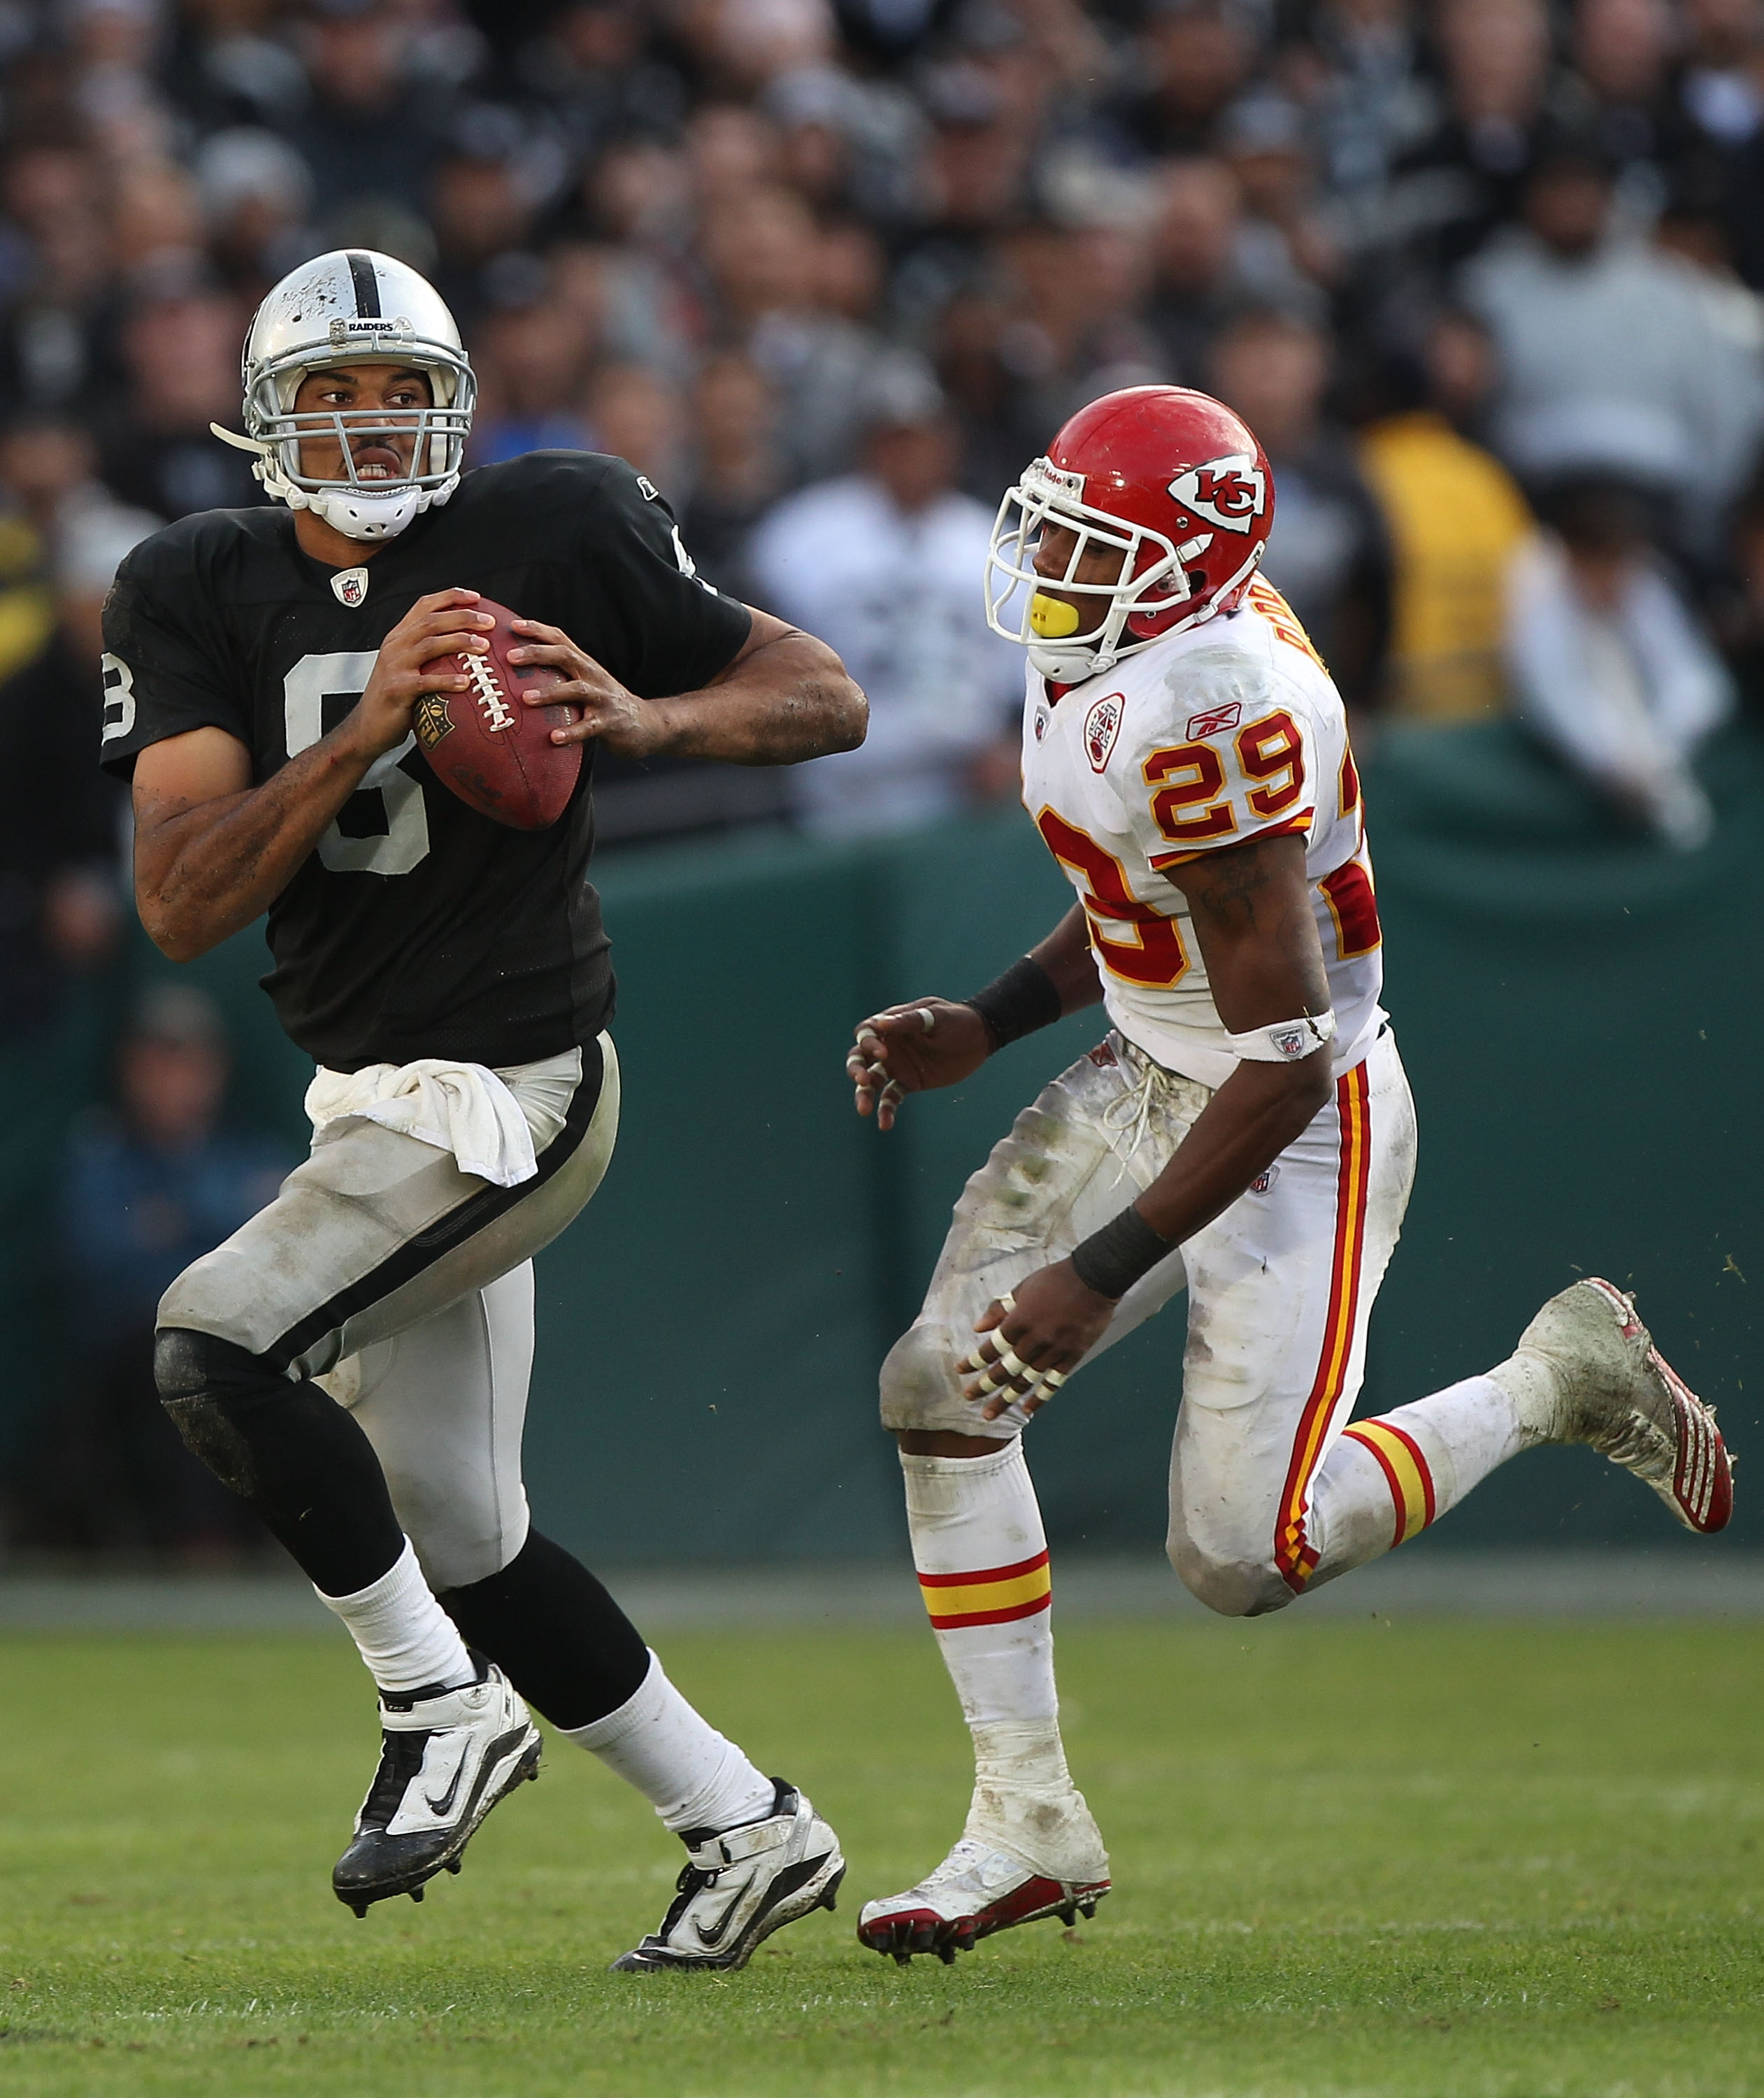 OAKLAND, CA - NOVEMBER 07:  Jason Campbell #8 of the Oakland Raiders runs against Eric Barry #29 of the Kansas City Chiefs during an NFL game at Oakland-Alameda County Coliseum on November 7, 2010 in Oakland, California.  (Photo by Jed Jacobsohn/Getty Ima